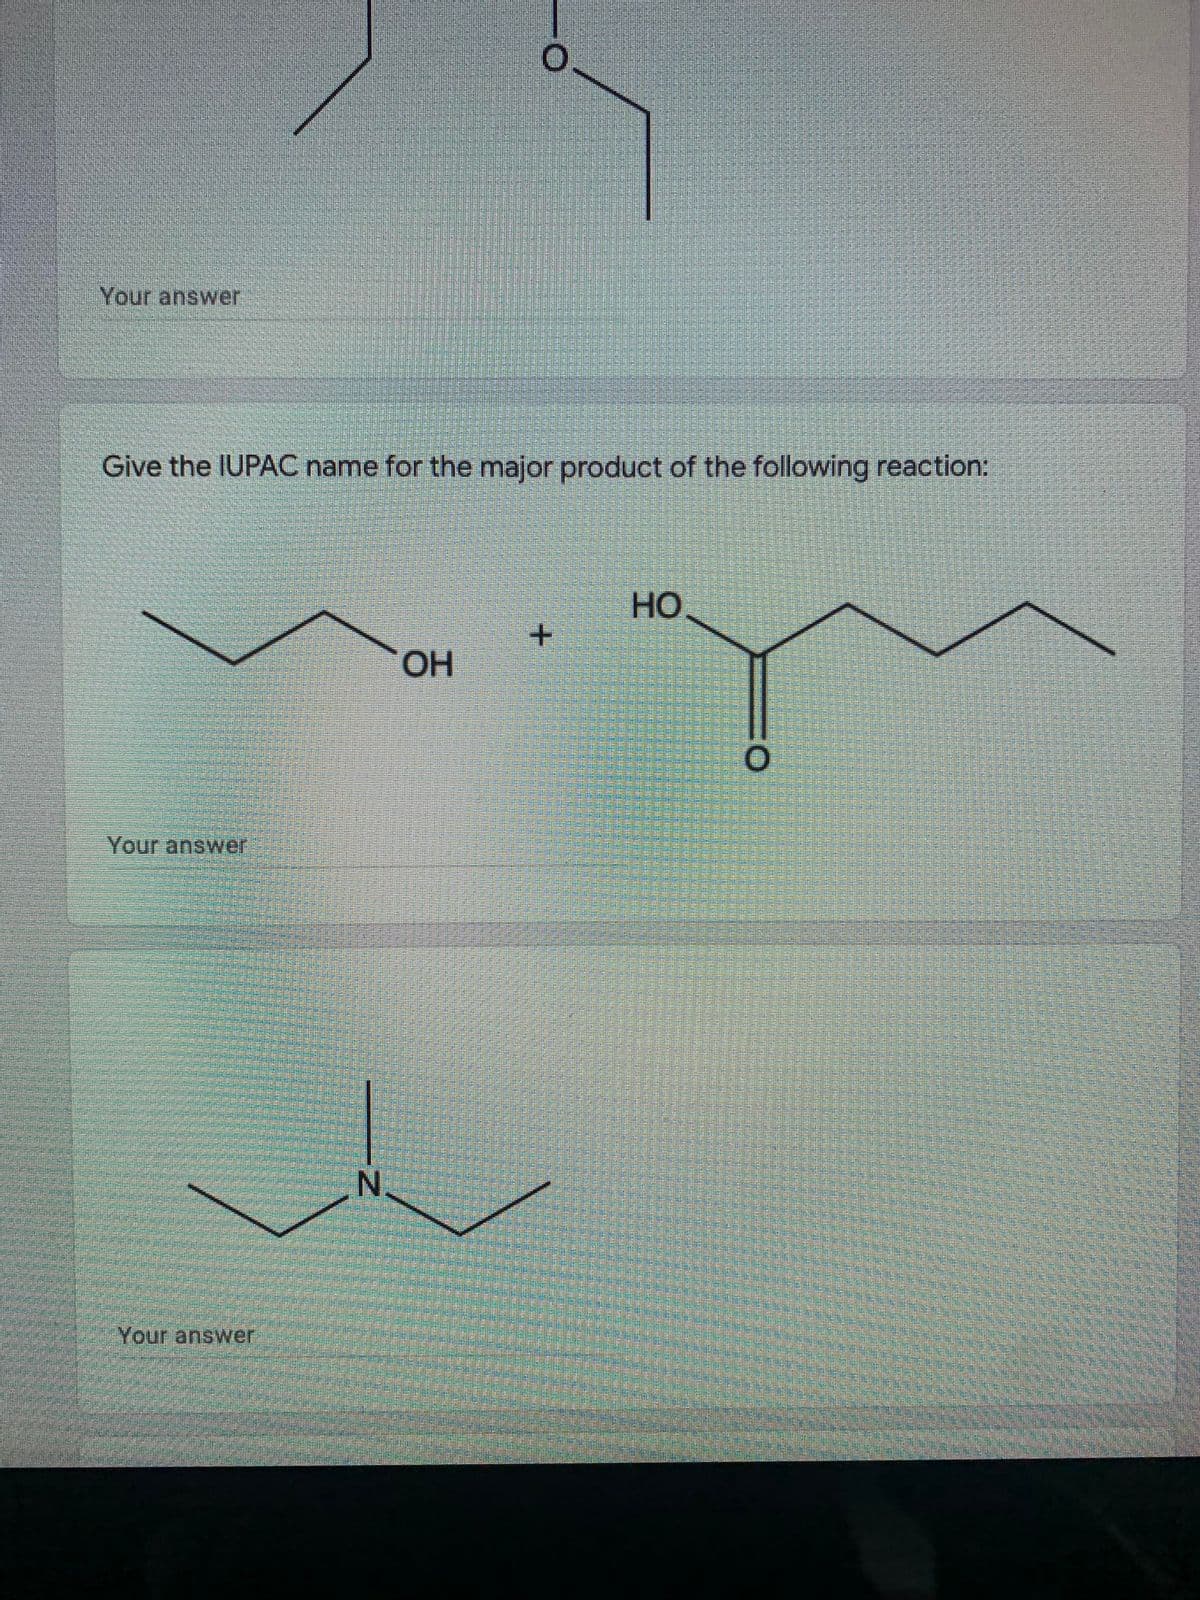 Your answer
Give the IUPAC name for the major product of the following reaction:
Но
OH
Your answer
N.
Your answer
